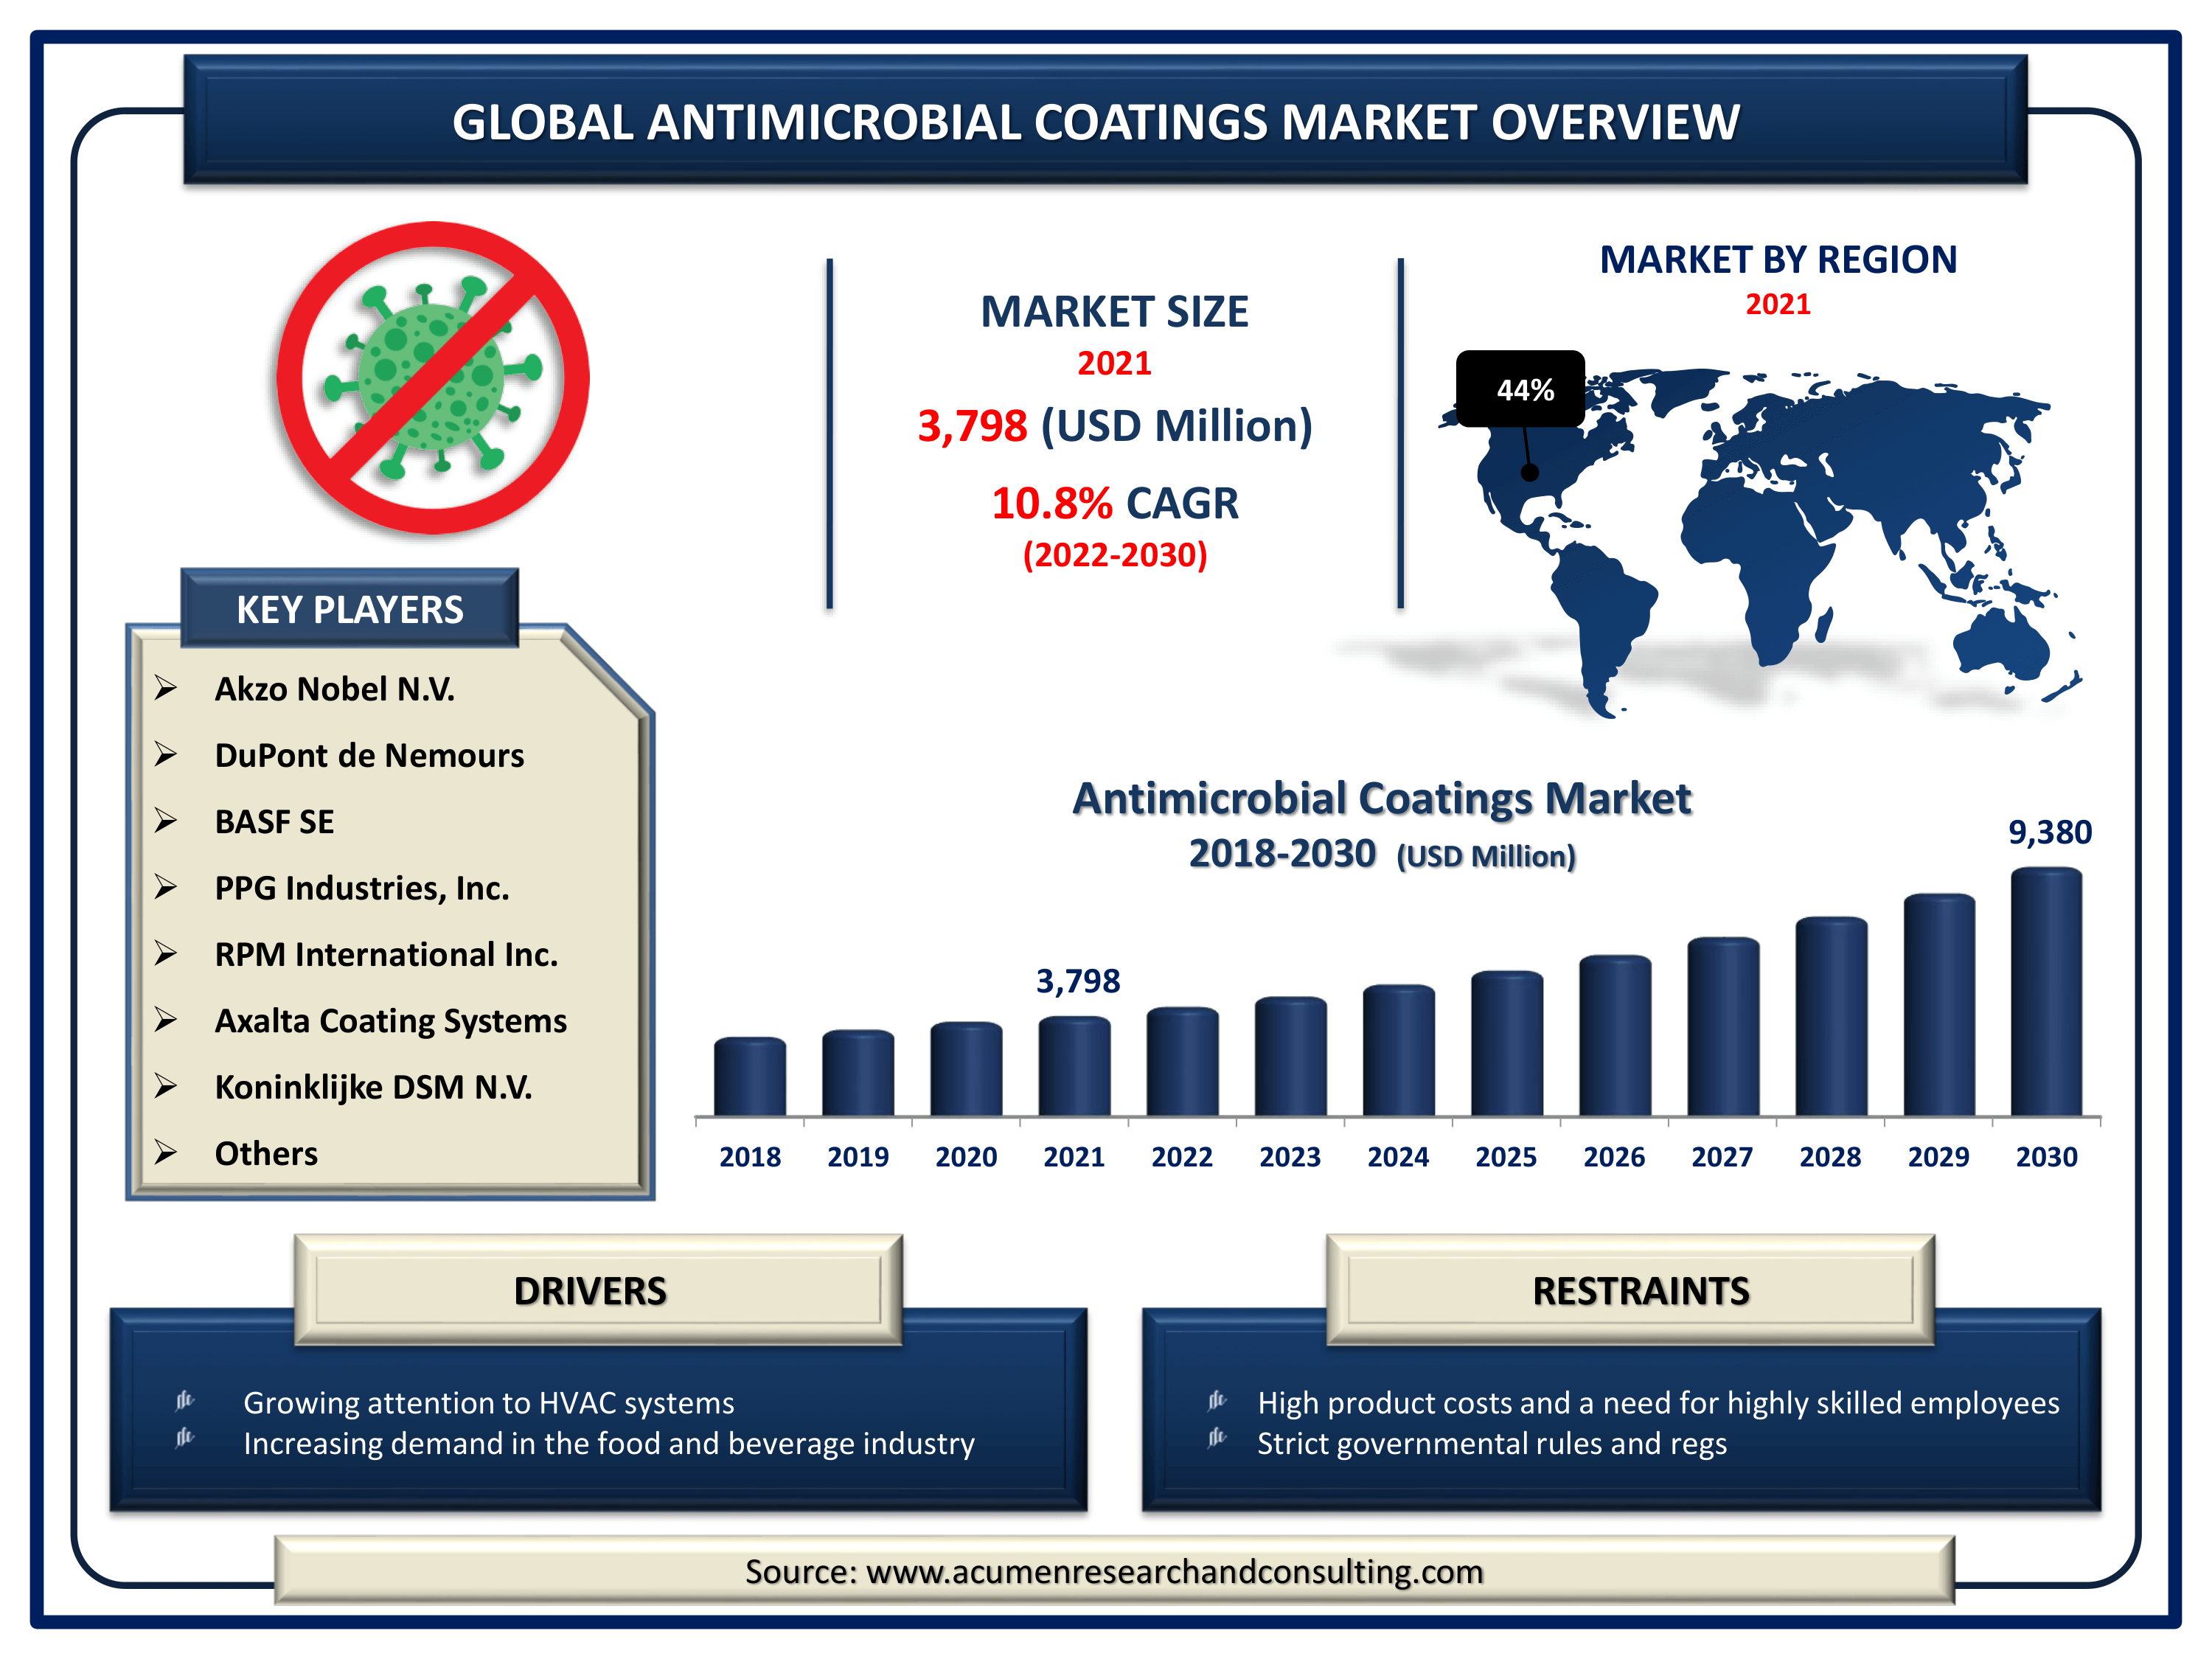 Global antimicrobial coatings market revenue is estimated to expand by USD 9,380 million by 2030, with a 10.8% CAGR from 2022 to 2030.